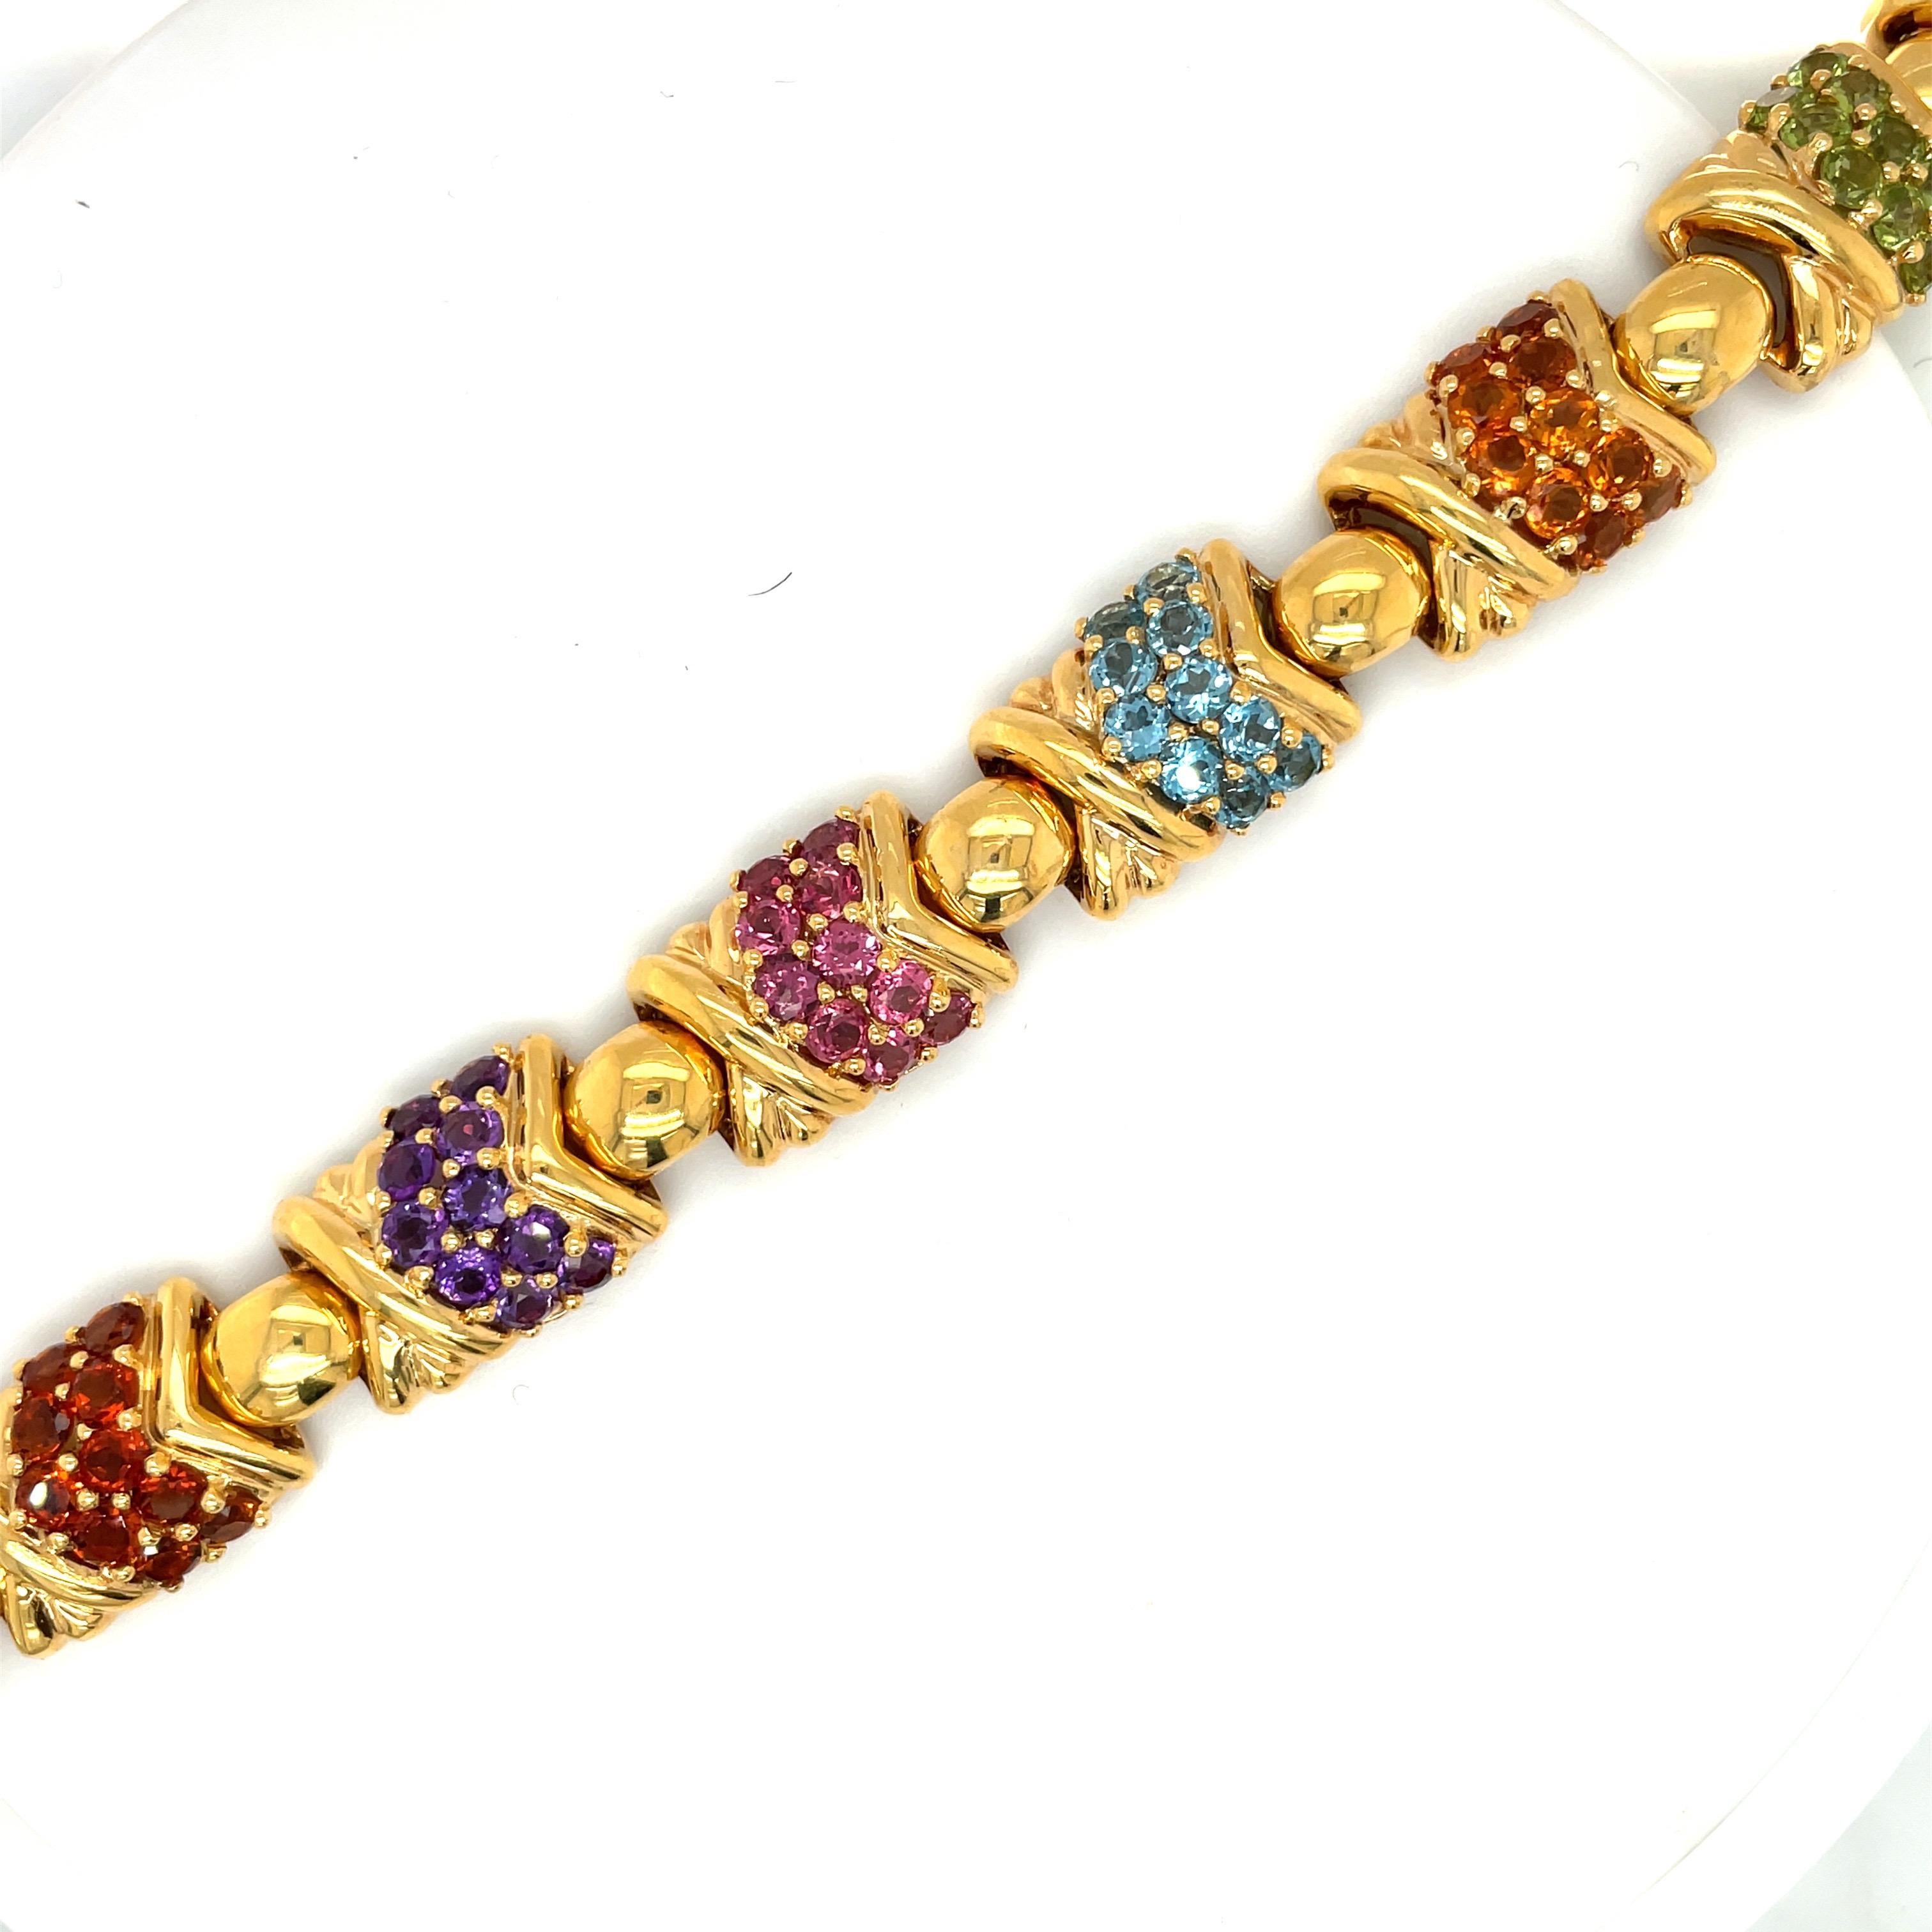 This colorful 18 karat yellow gold and semi precious stone bracelet is designed with 6 sections composed of semi-precious stones and a gold 